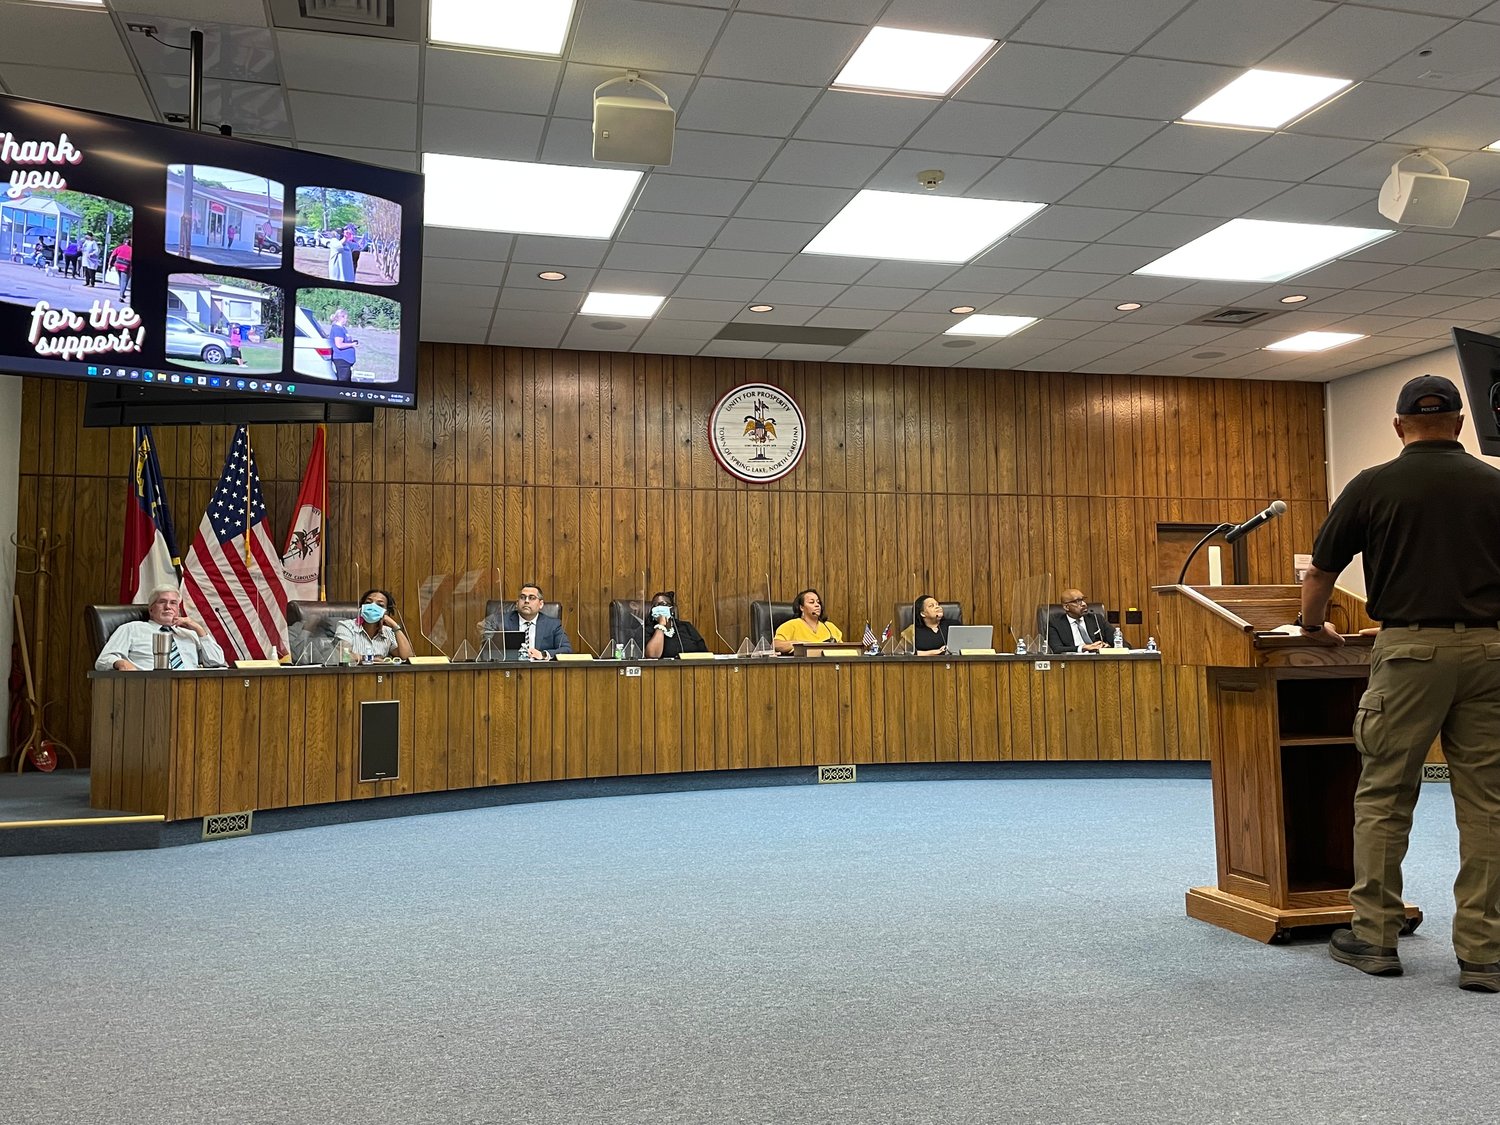 The Spring Lake Board of Aldermen hear an update Monday from the Police Department on the Spring Lake Law Enforcement Torch Run for Special Olympics that took place April 23.